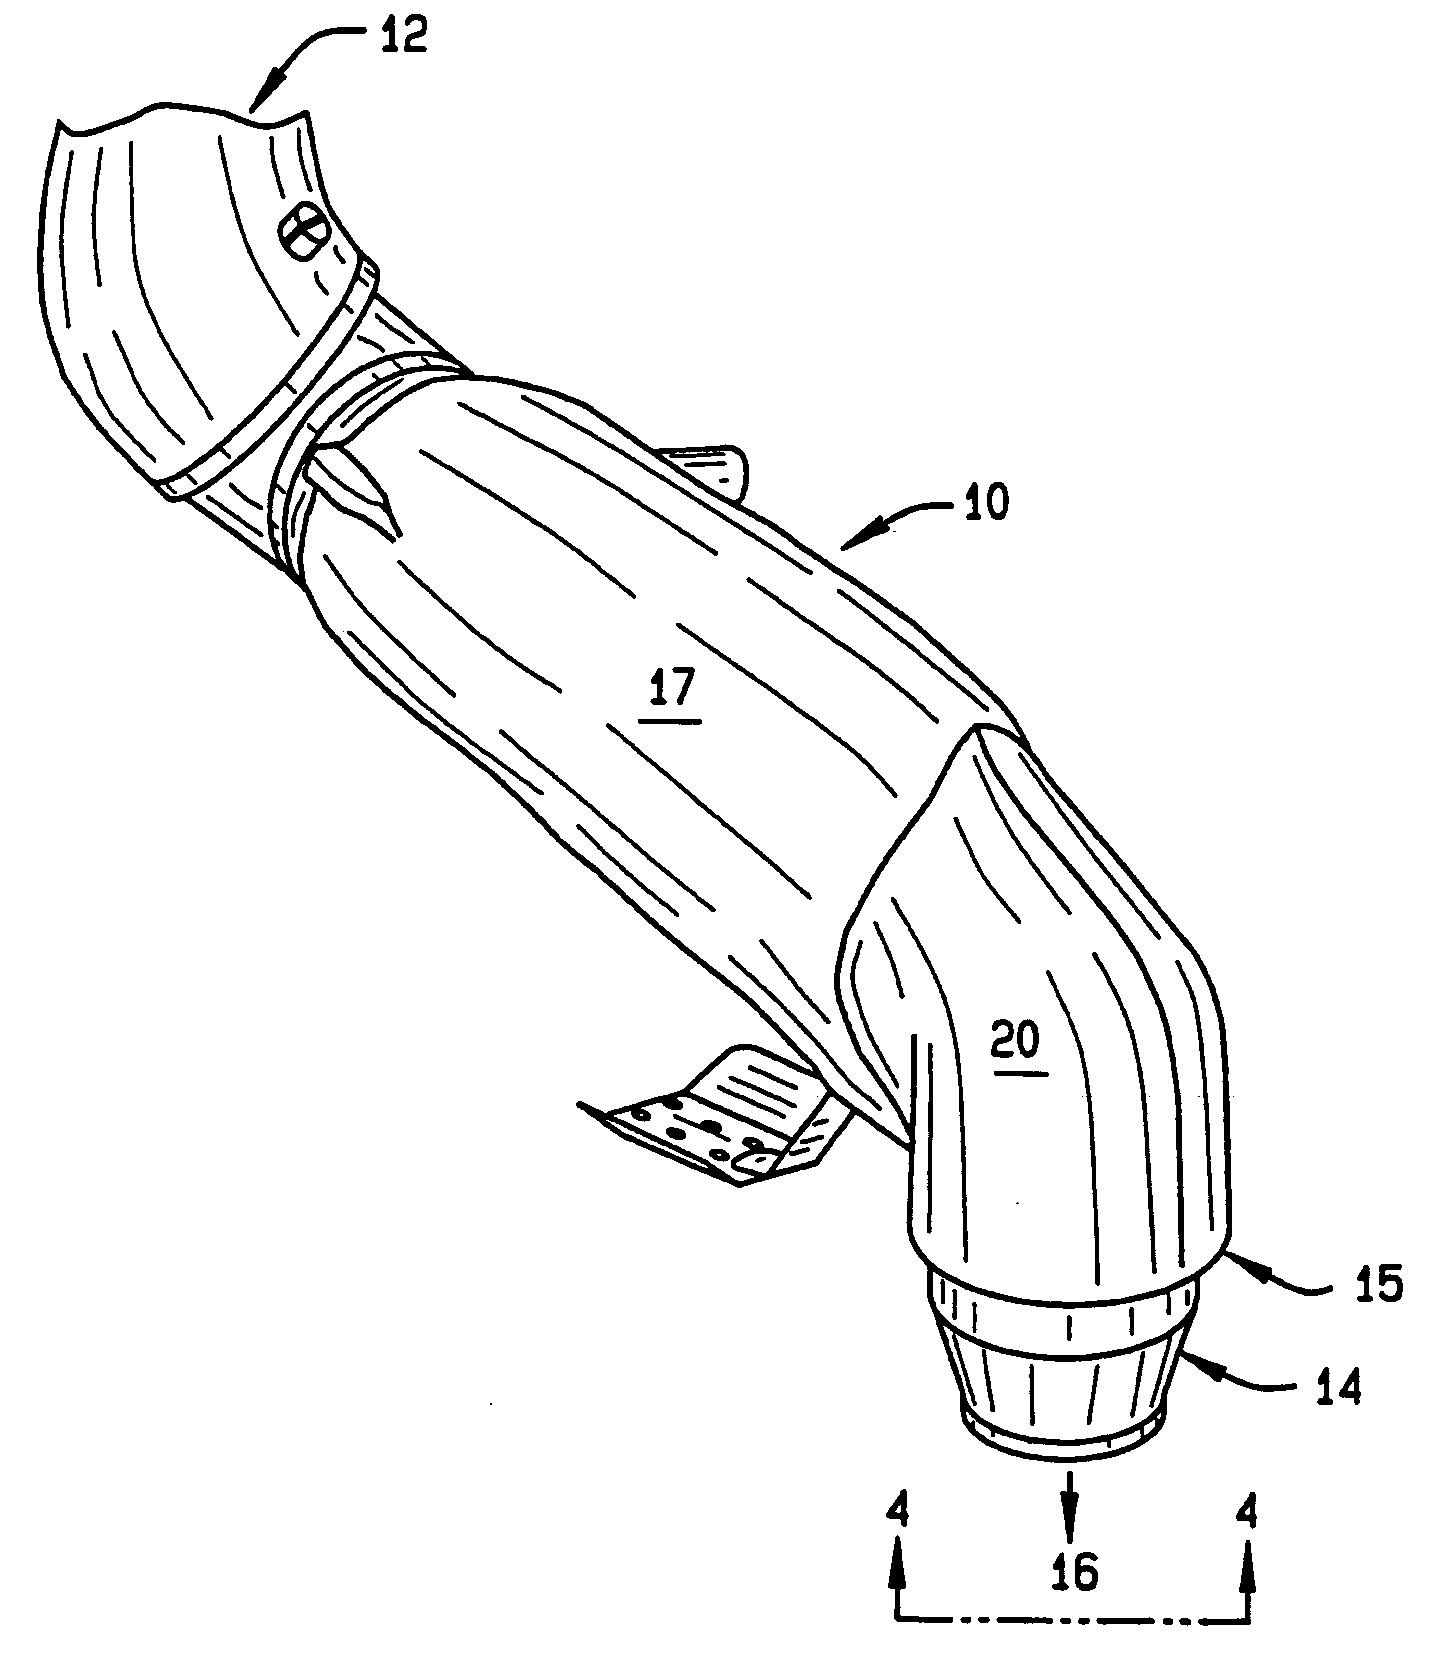 Method and apparatus for creating an enhanced electrical field to improve paint transfer efficiencies